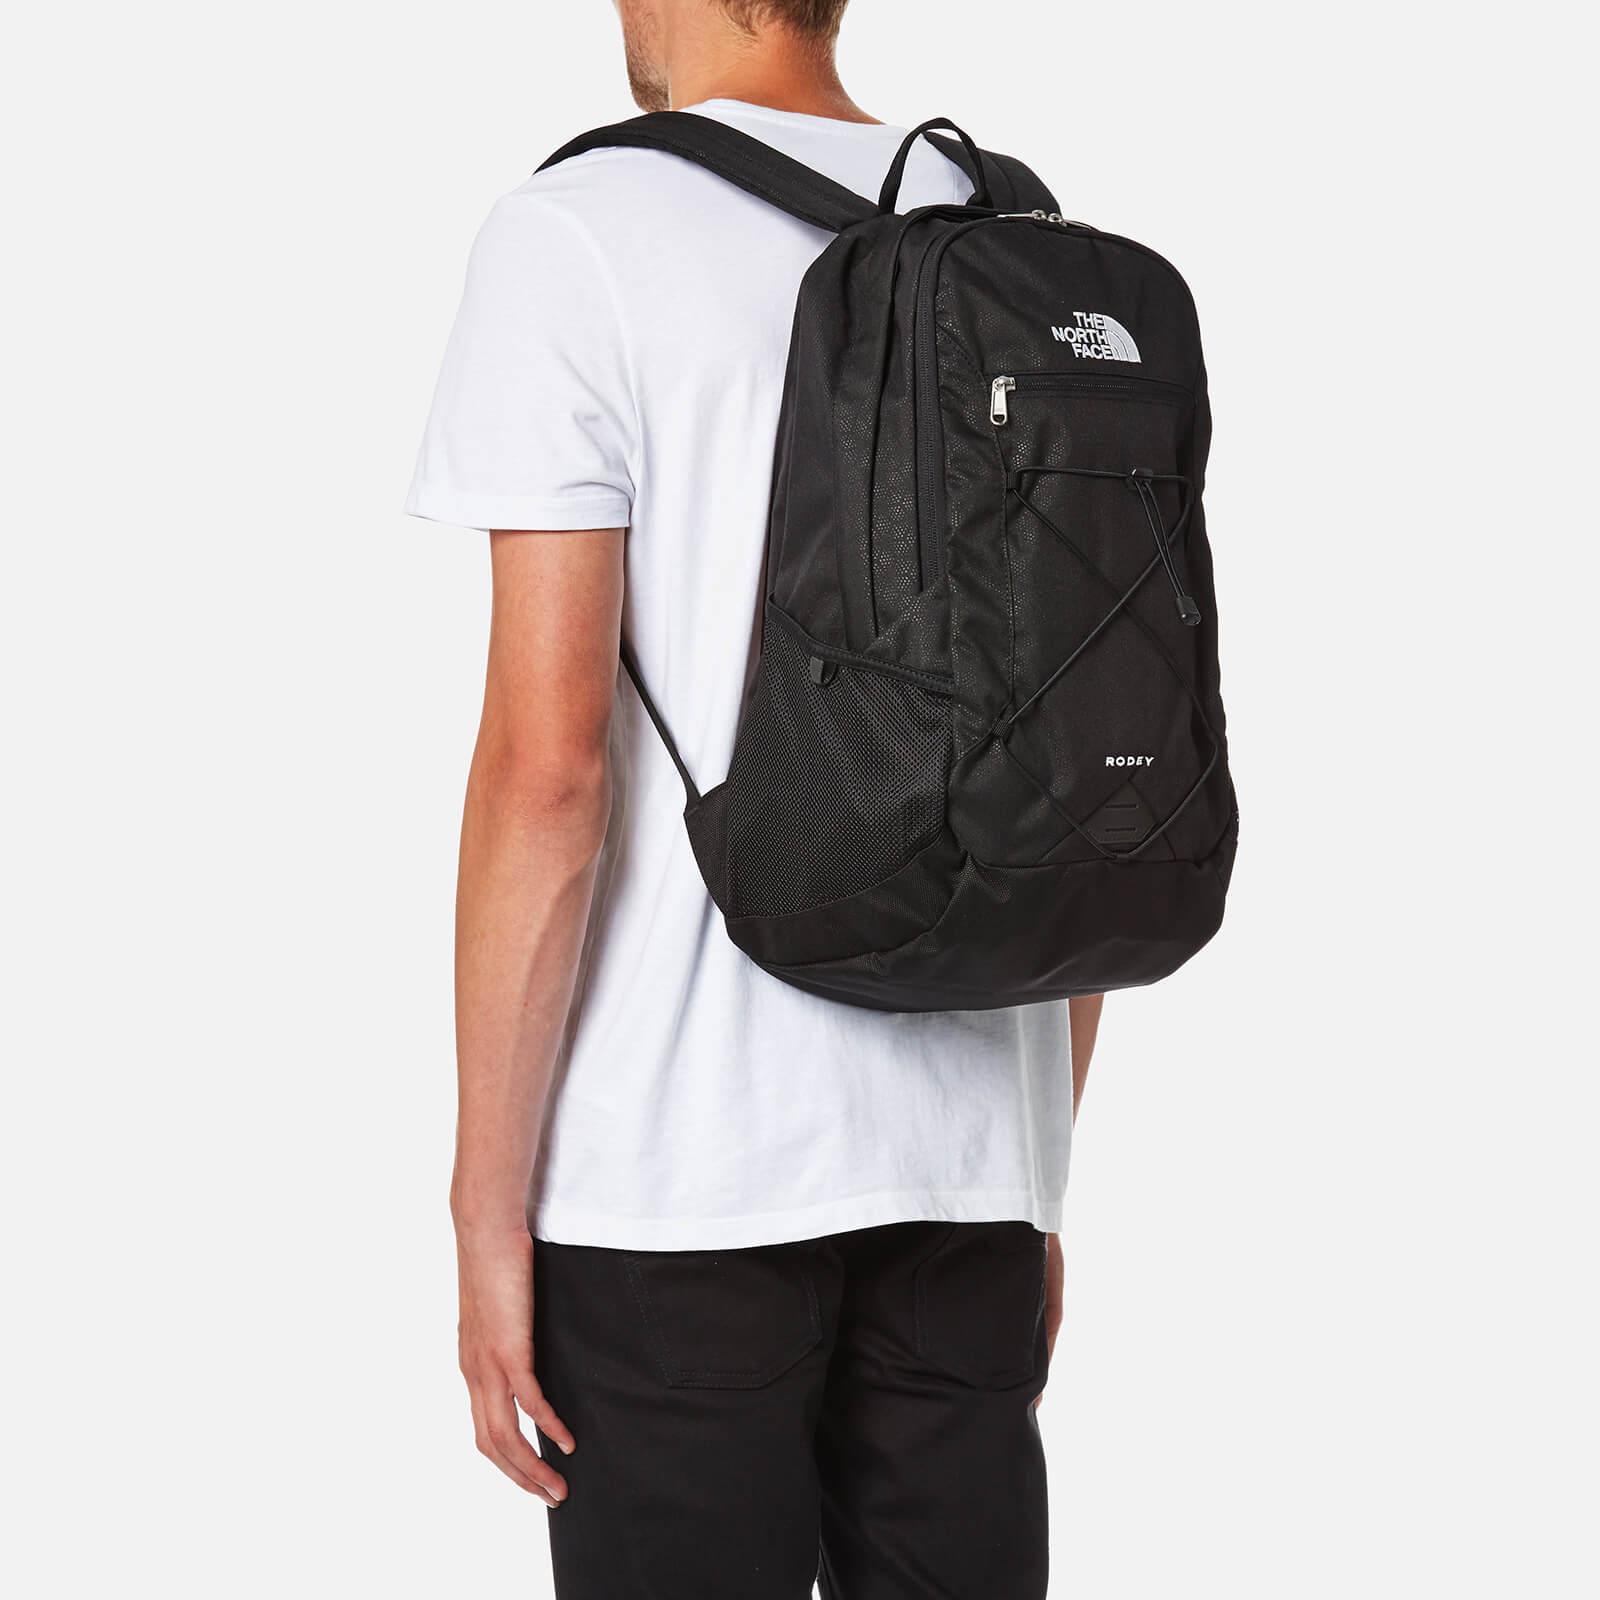 north face rodey backpack